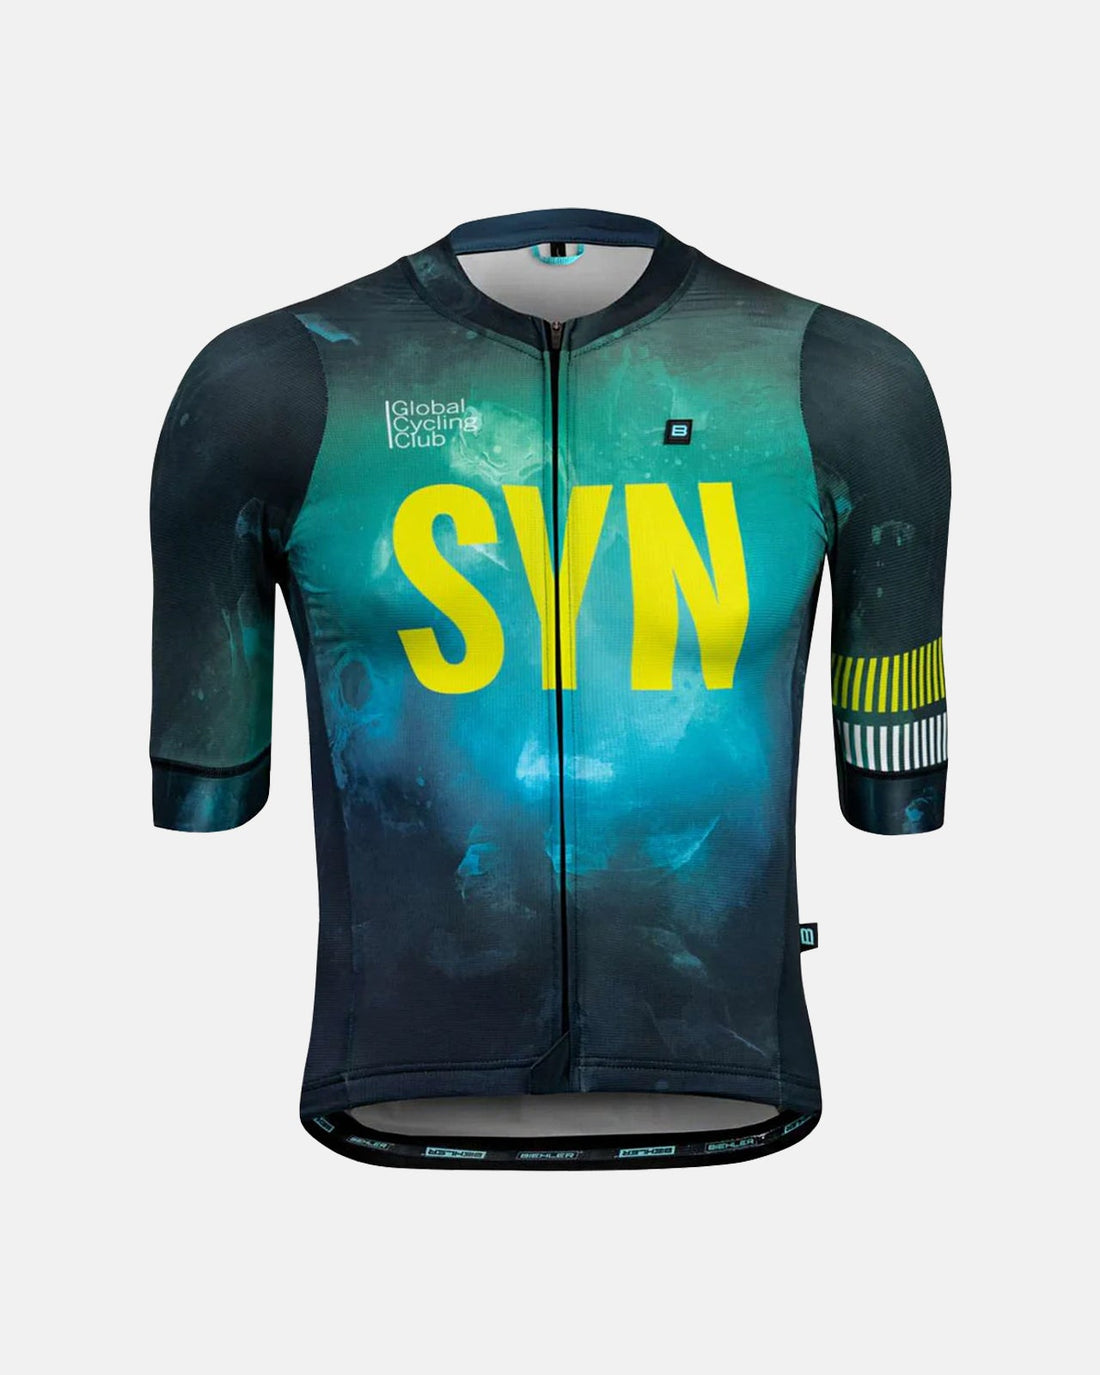 Syndicate Climber Jersey - Neon Space